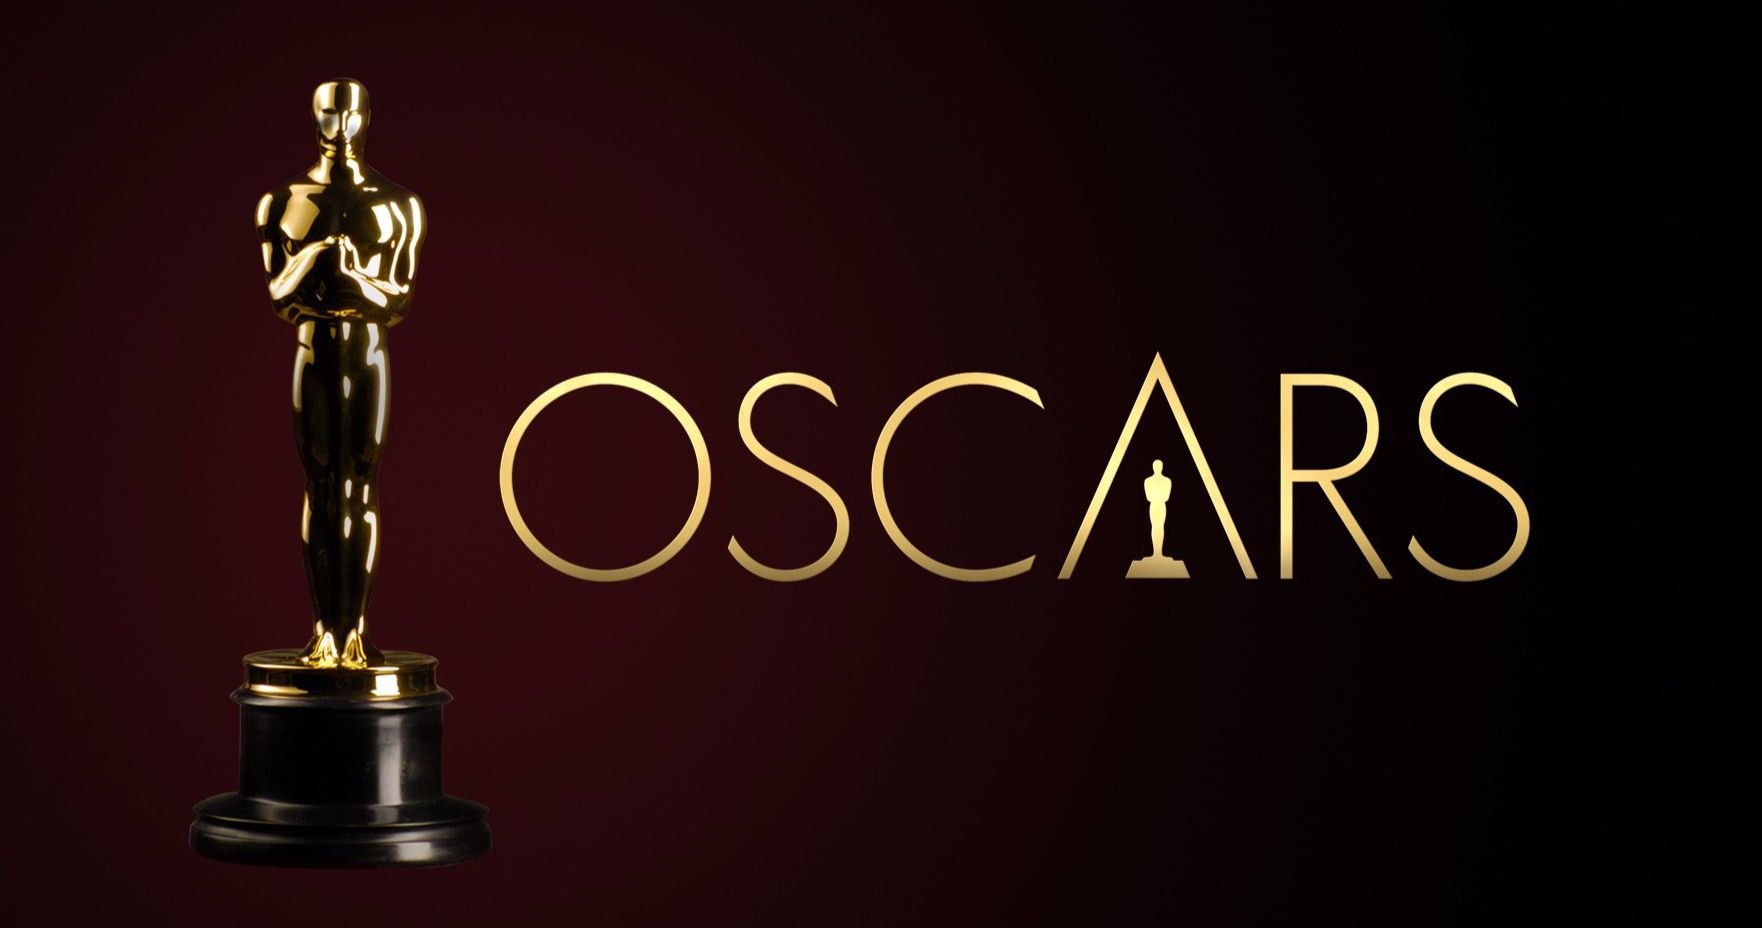 The Oscars Predicted Their Own 2020 Winners, Then Deleted the Tweet